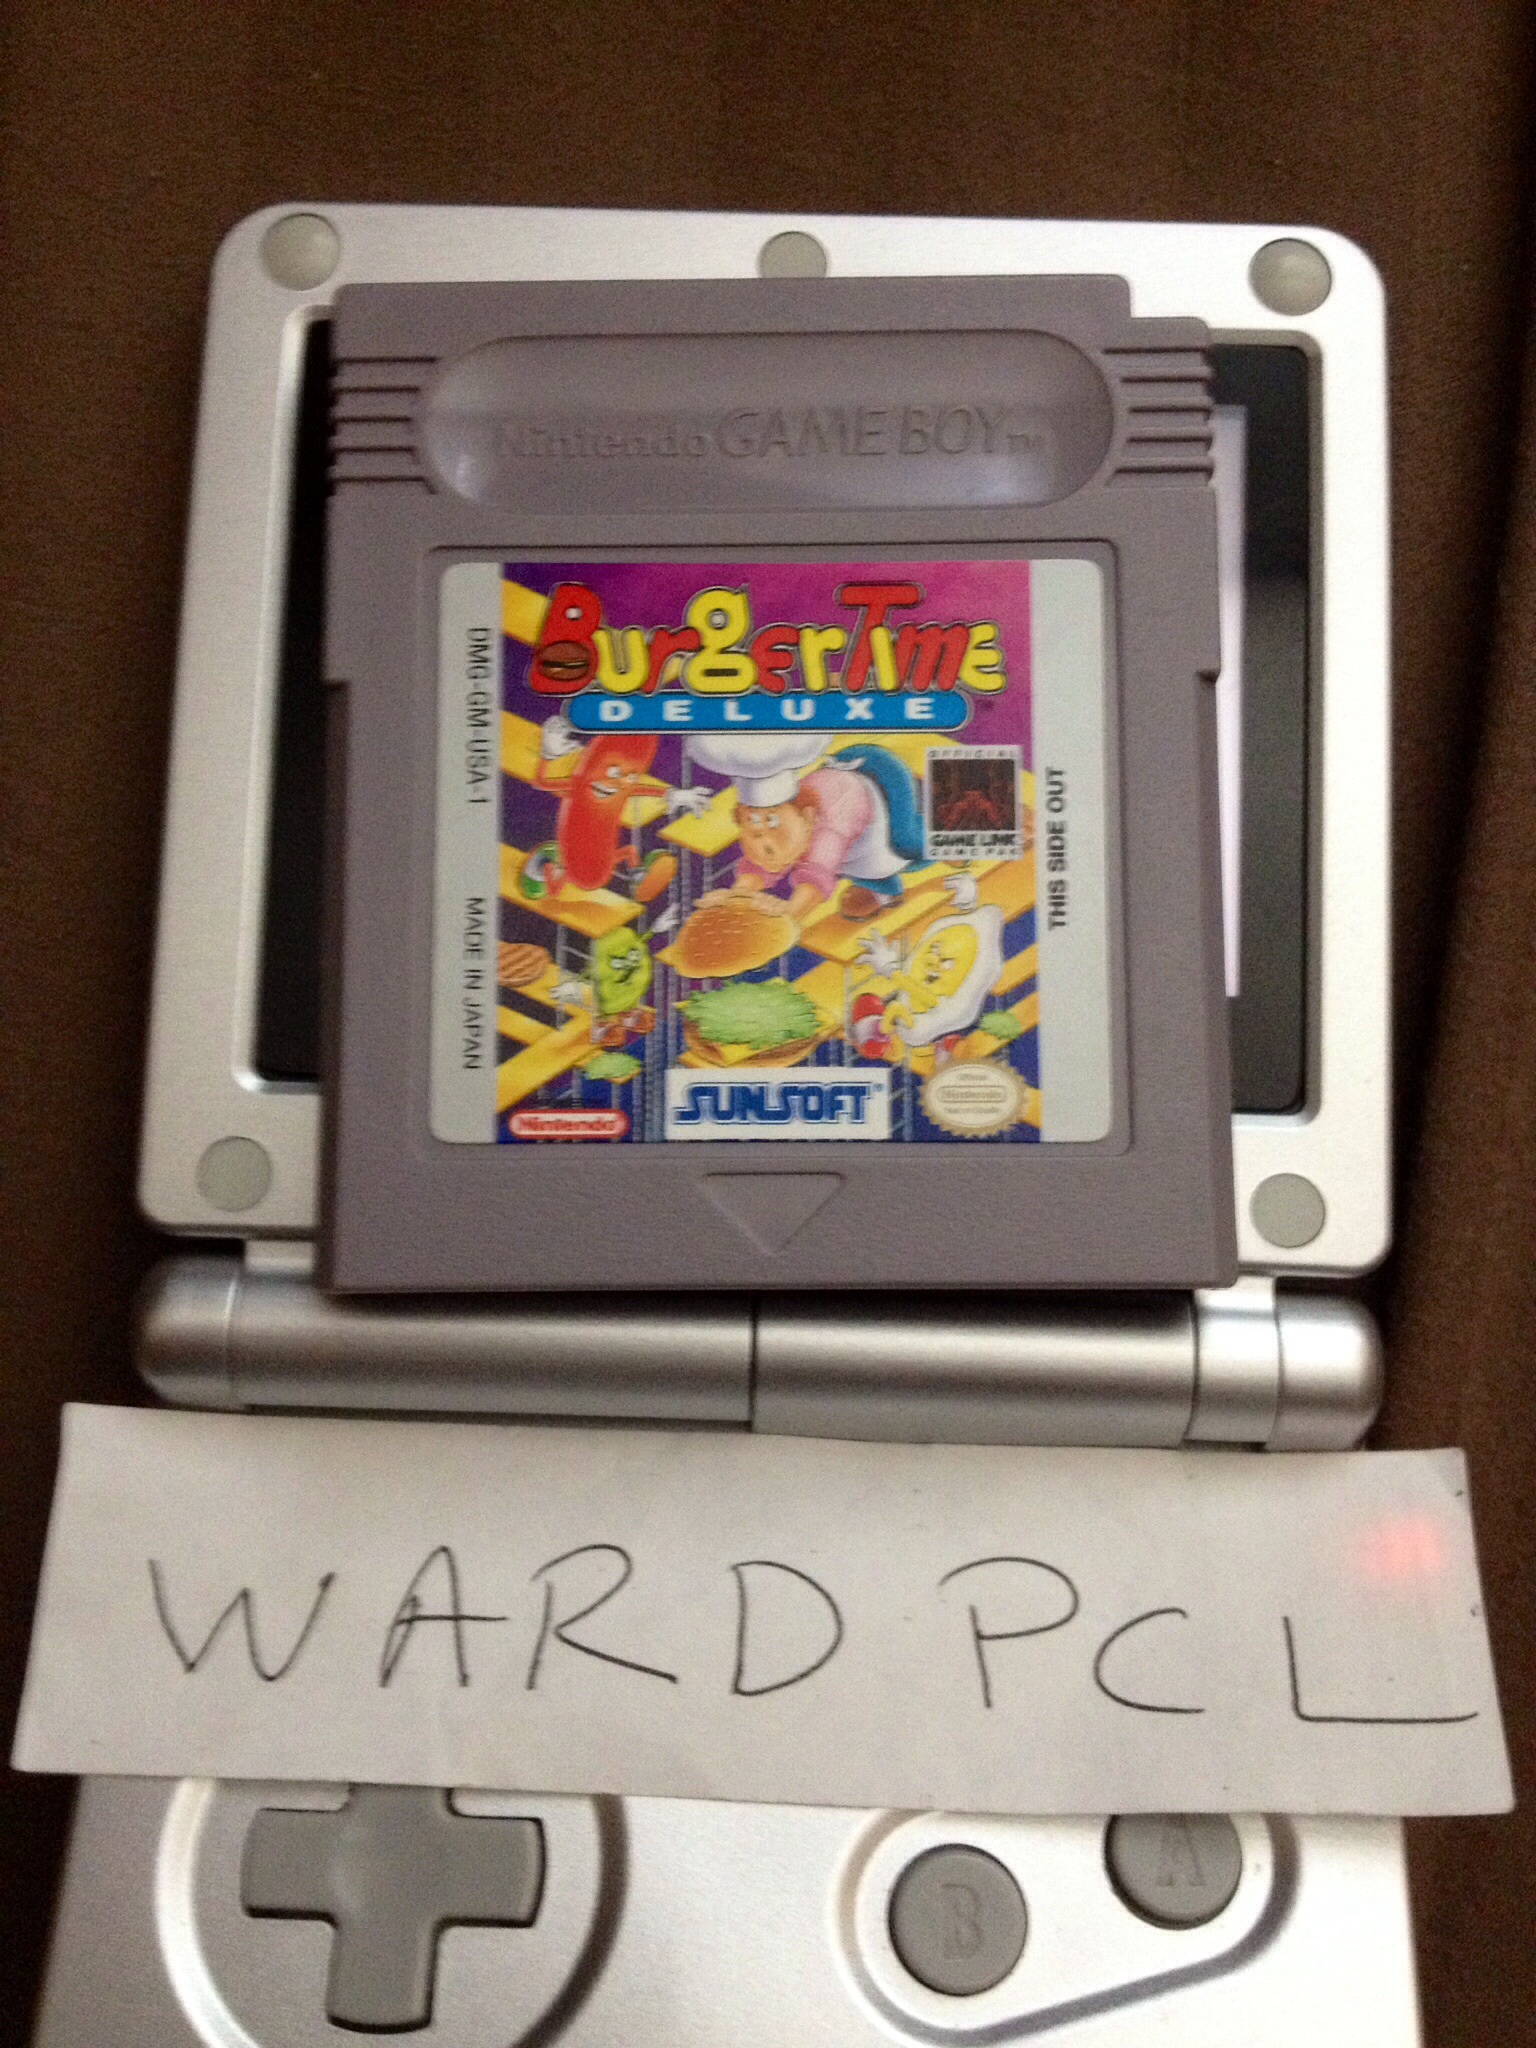 Wardpcl: Burgertime Deluxe (Game Boy) 51,800 points on 2015-09-07 16:38:35